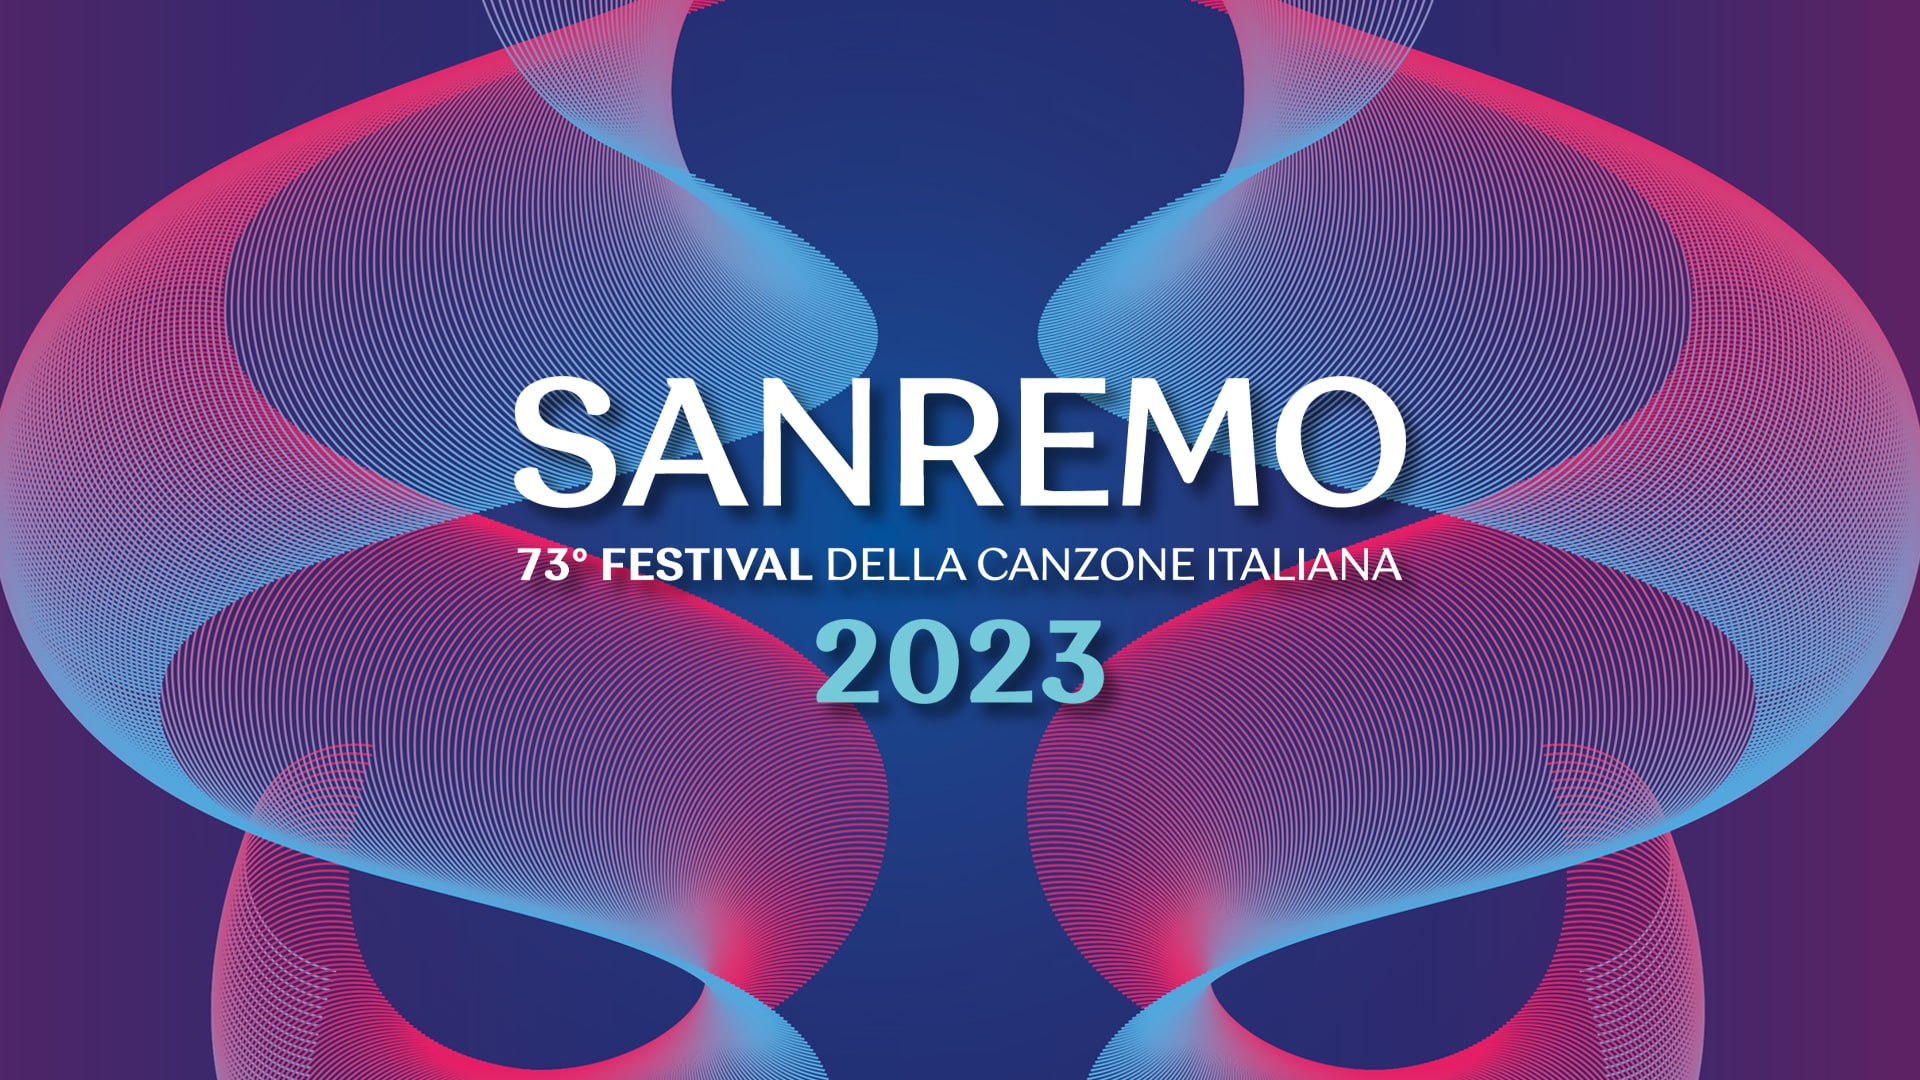 Sanremo Festival 2023 - A Guide to Italy's Iconic Music Event